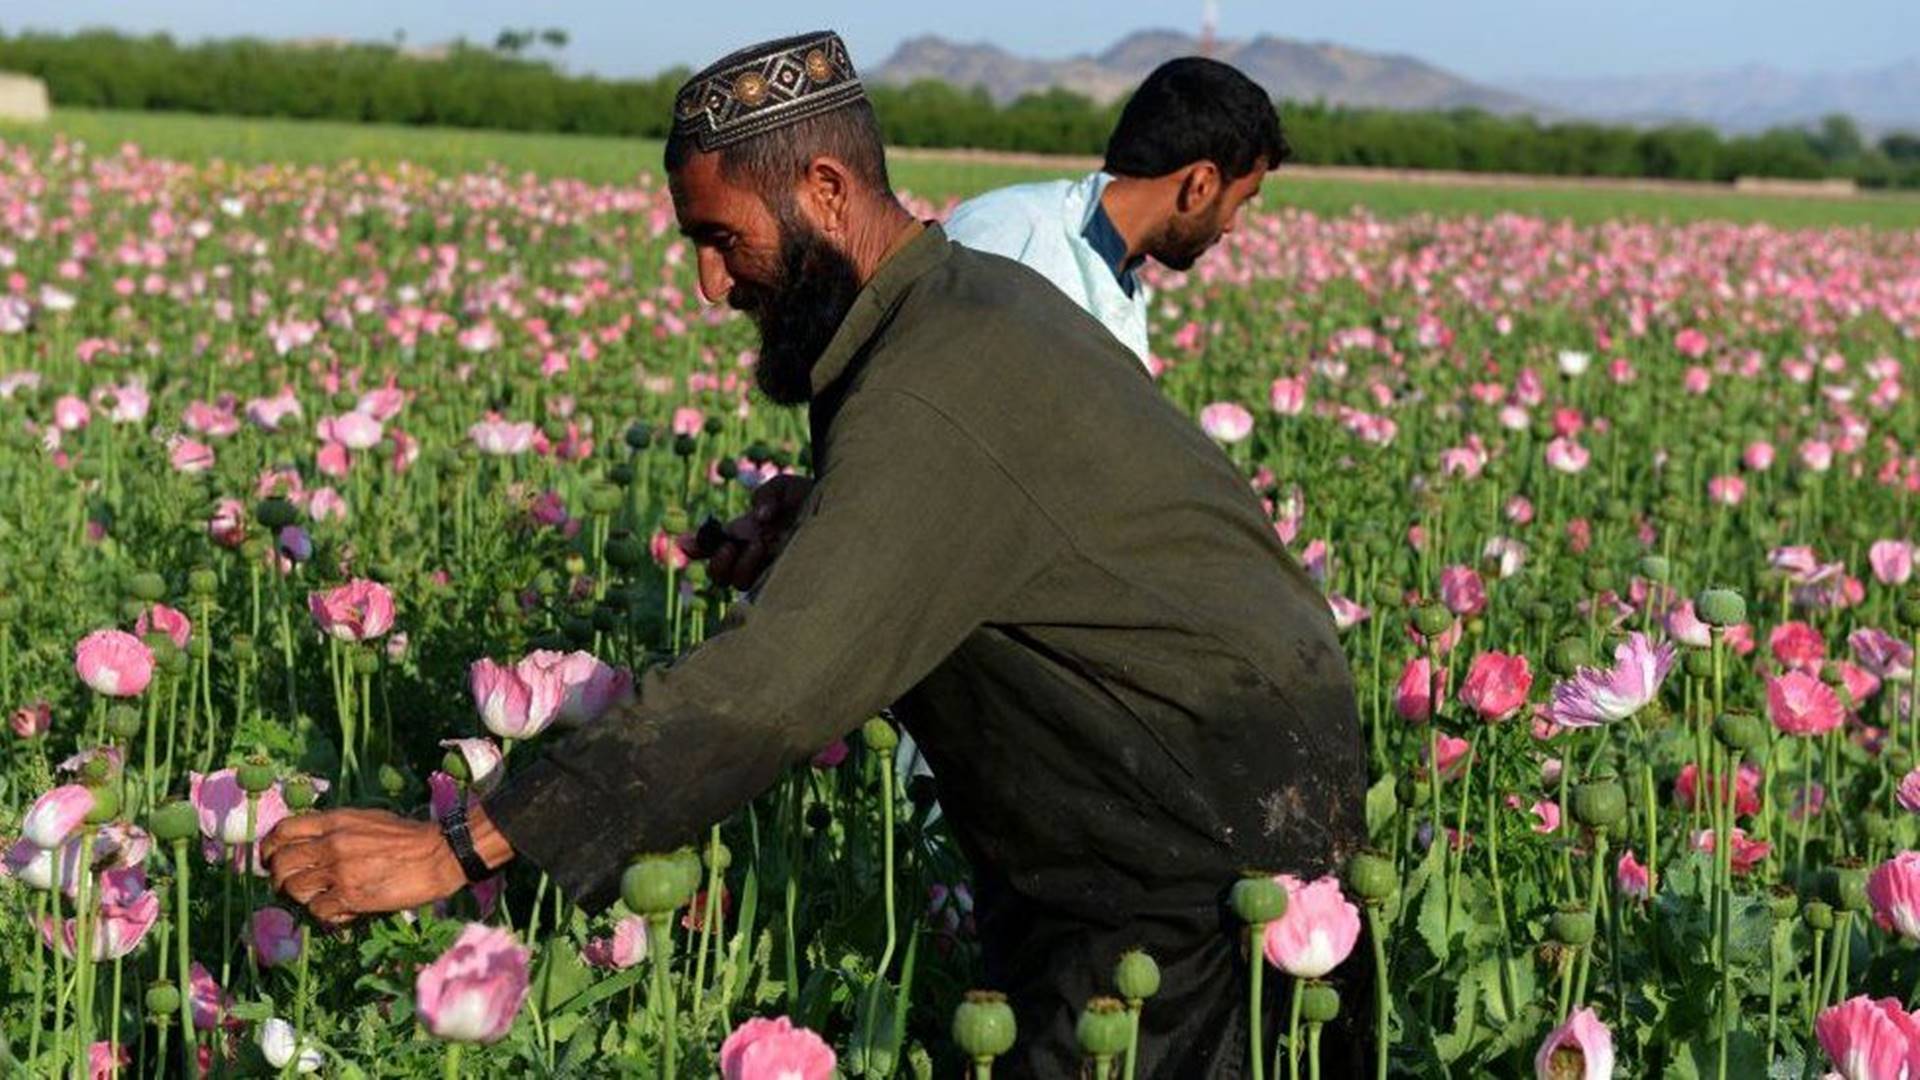 Afghanistan: How much opium is produced and what's the Taliban's record?